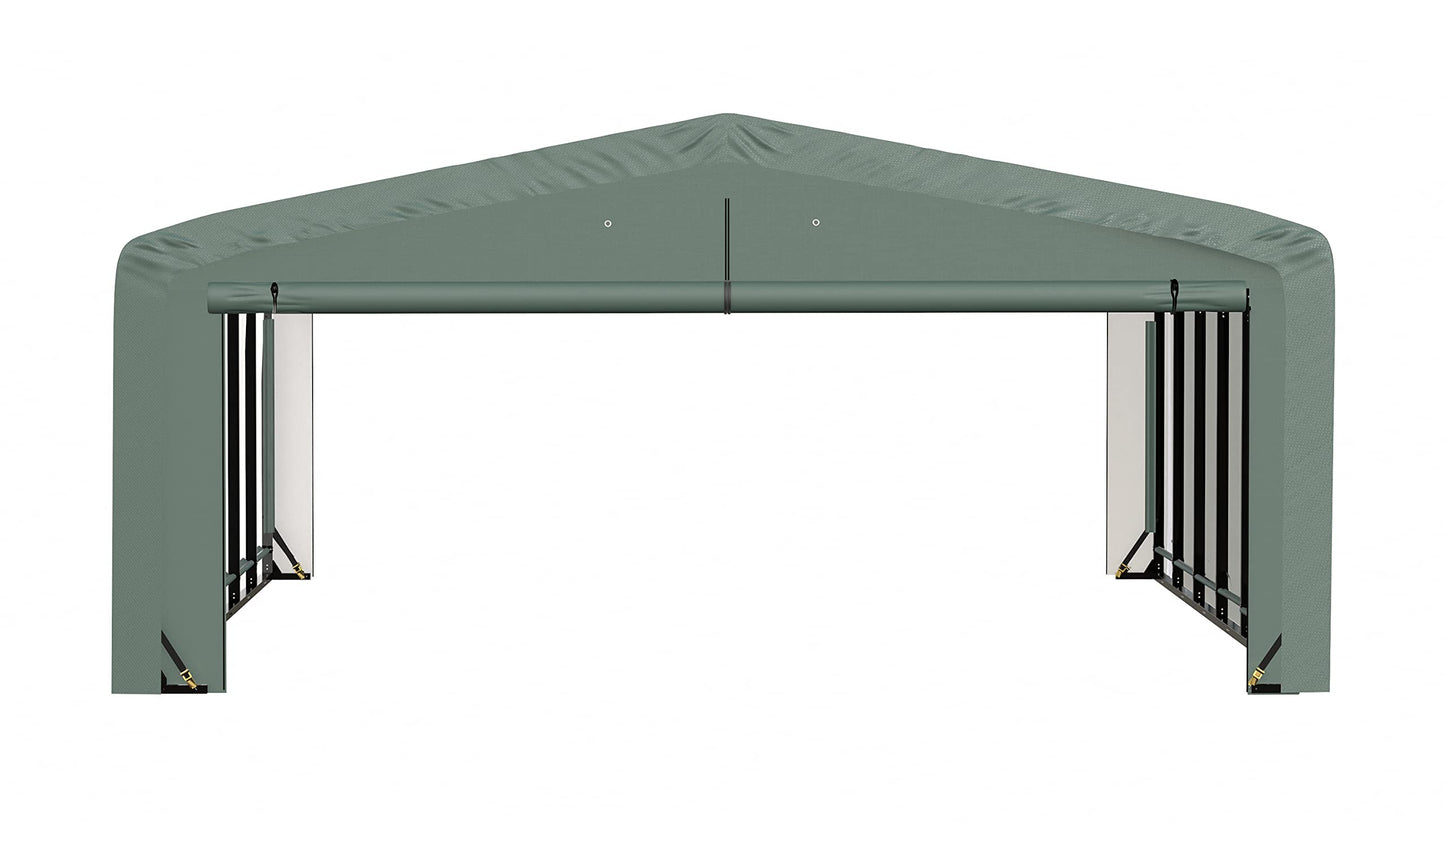 ShelterLogic ShelterTube Garage & Storage Shelter, 20' x 27' x 10' Heavy-Duty Steel Frame Wind and Snow-Load Rated Enclosure, Green 20' x 27' x 10'